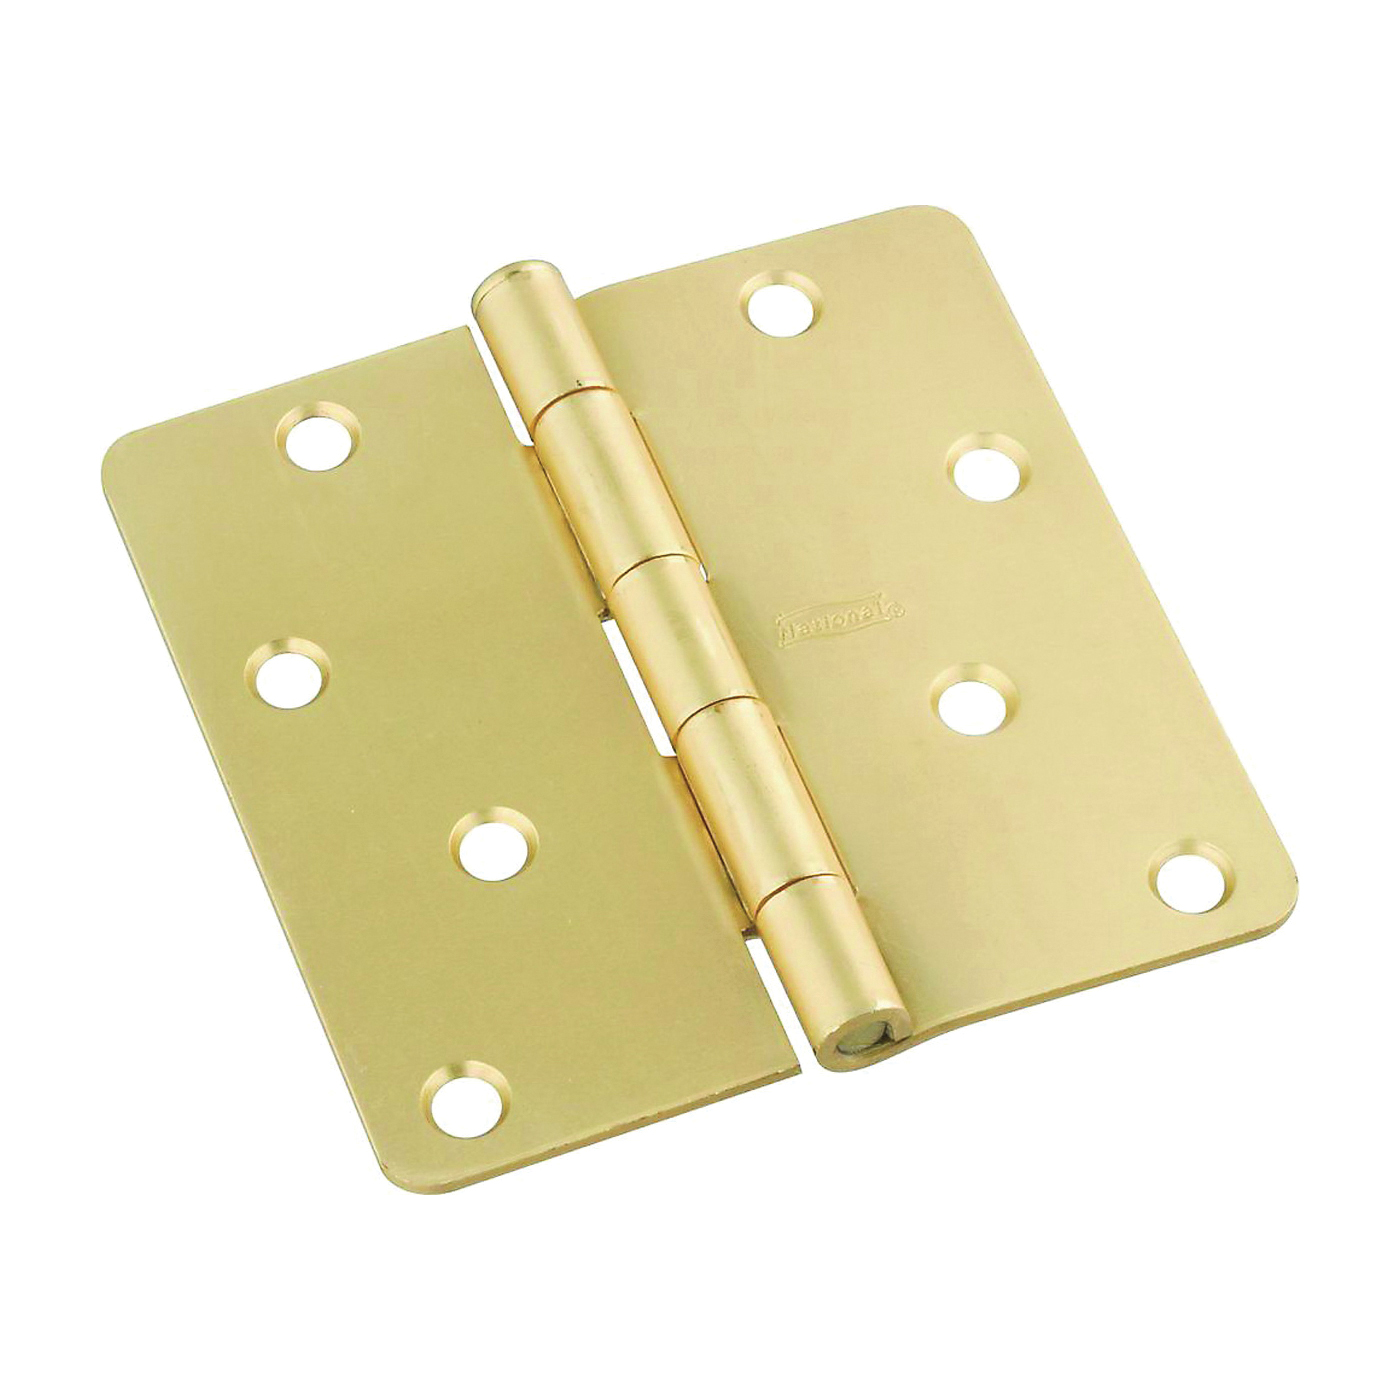 N830-229 Door Hinge, Cold Rolled Steel, Satin Brass, Non-Rising, Removable Pin, Full-Mortise Mounting